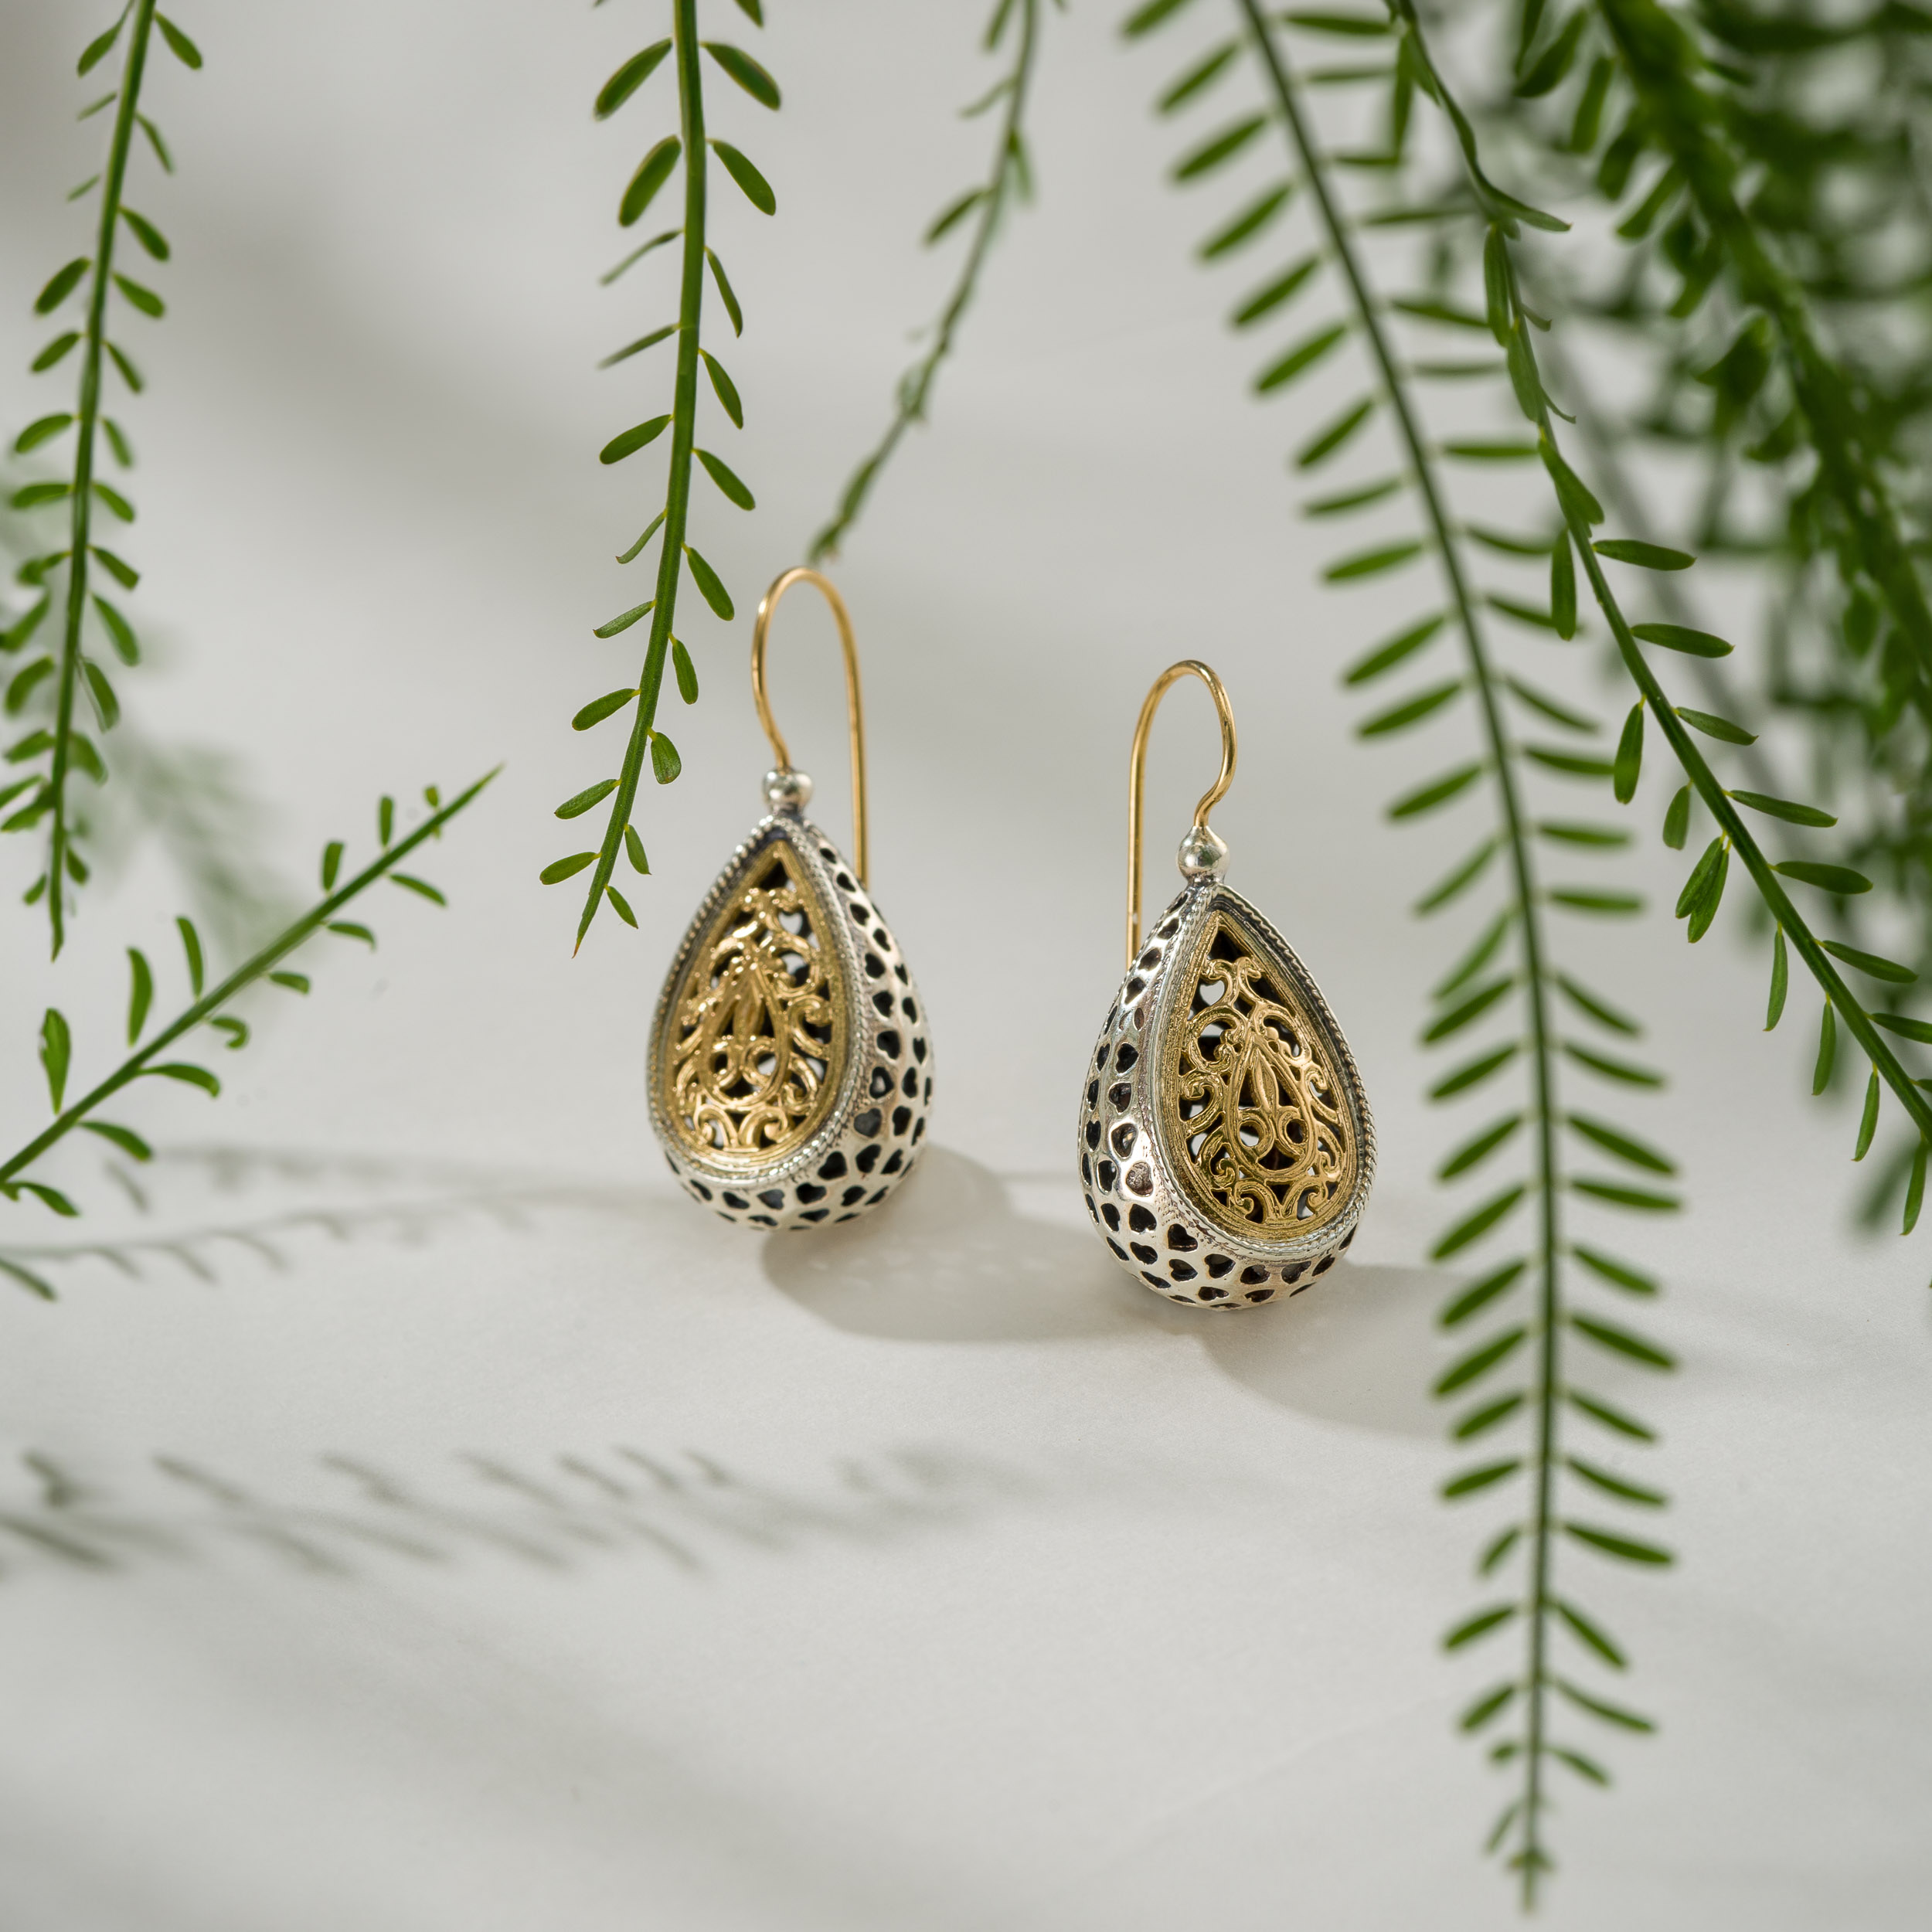 Garden Shadows drop Earrings in 18K Gold and Sterling Silver